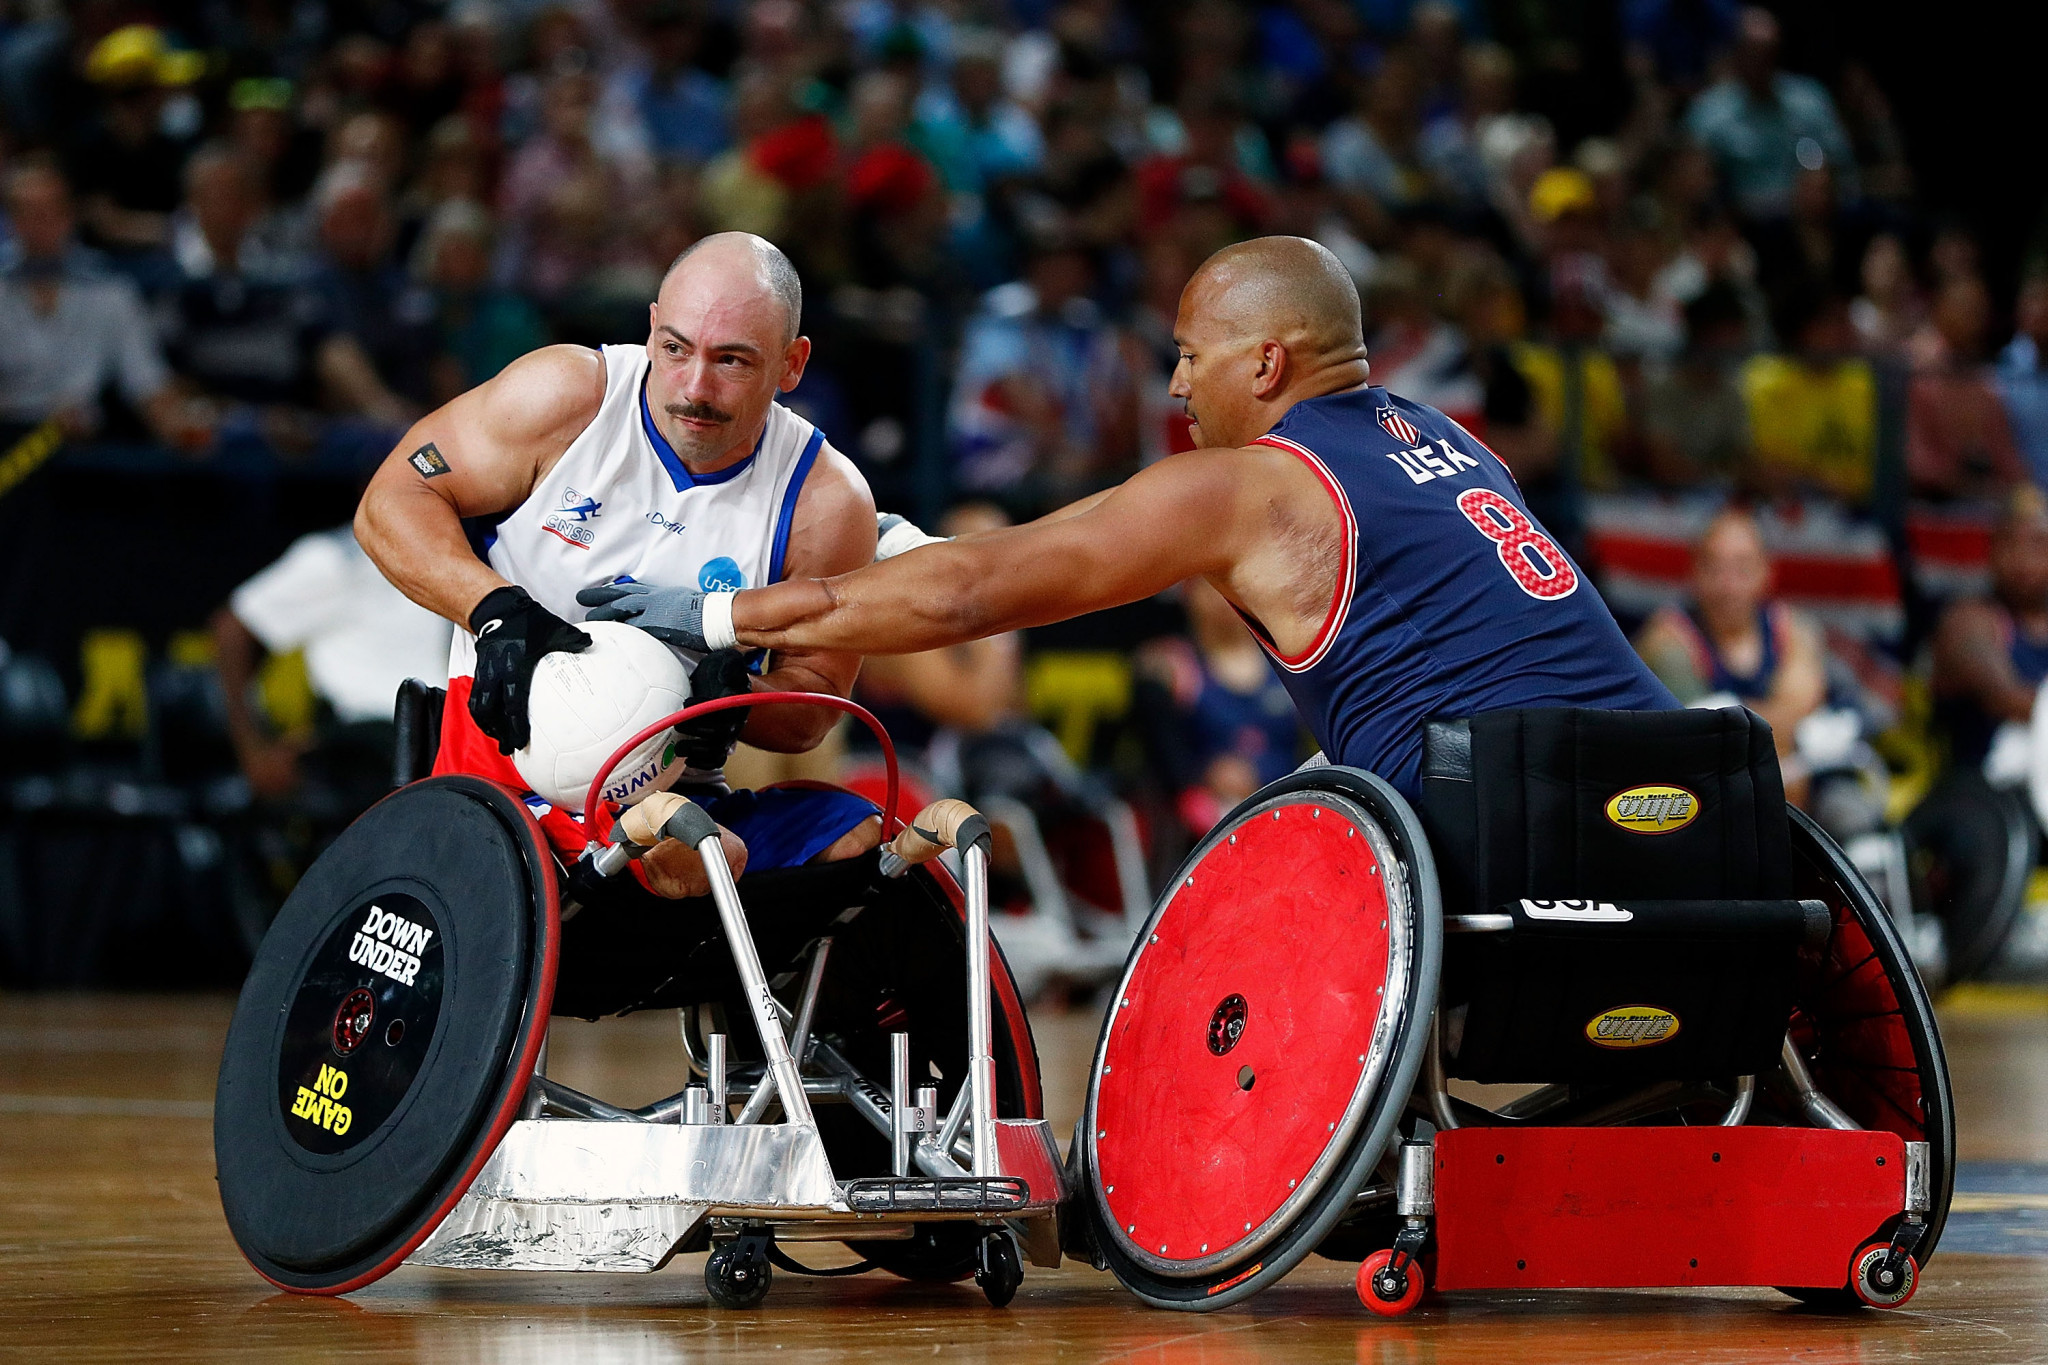 The United States wheelchair rugby team recently won bronze at the Invictus Games in Sydney ©Getty Images